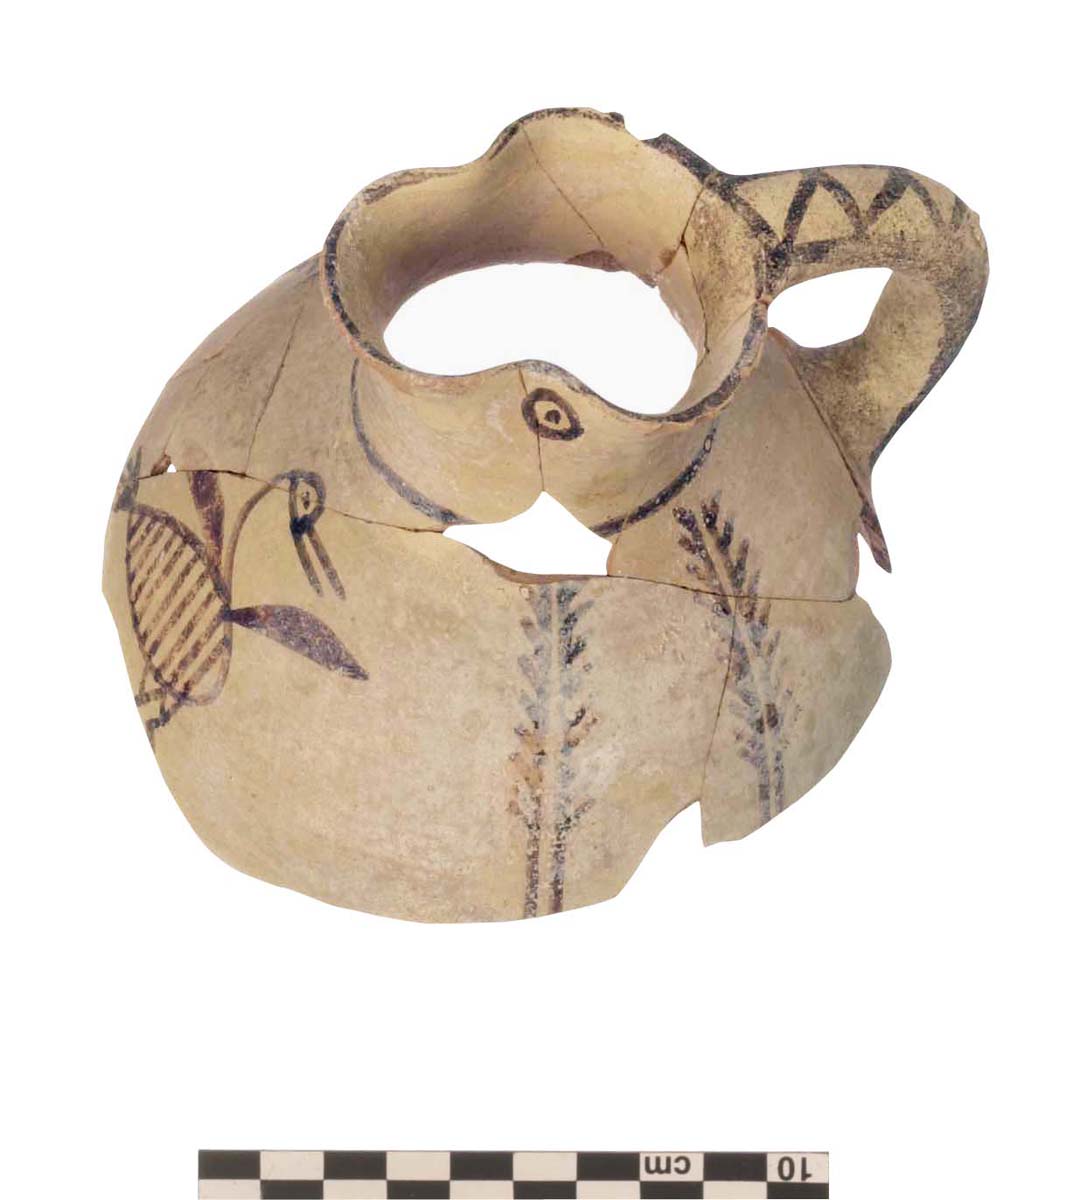 Bothros, Bichrome jug decorated with a bird (Ph. Collet / Archives EFA, N032-067)